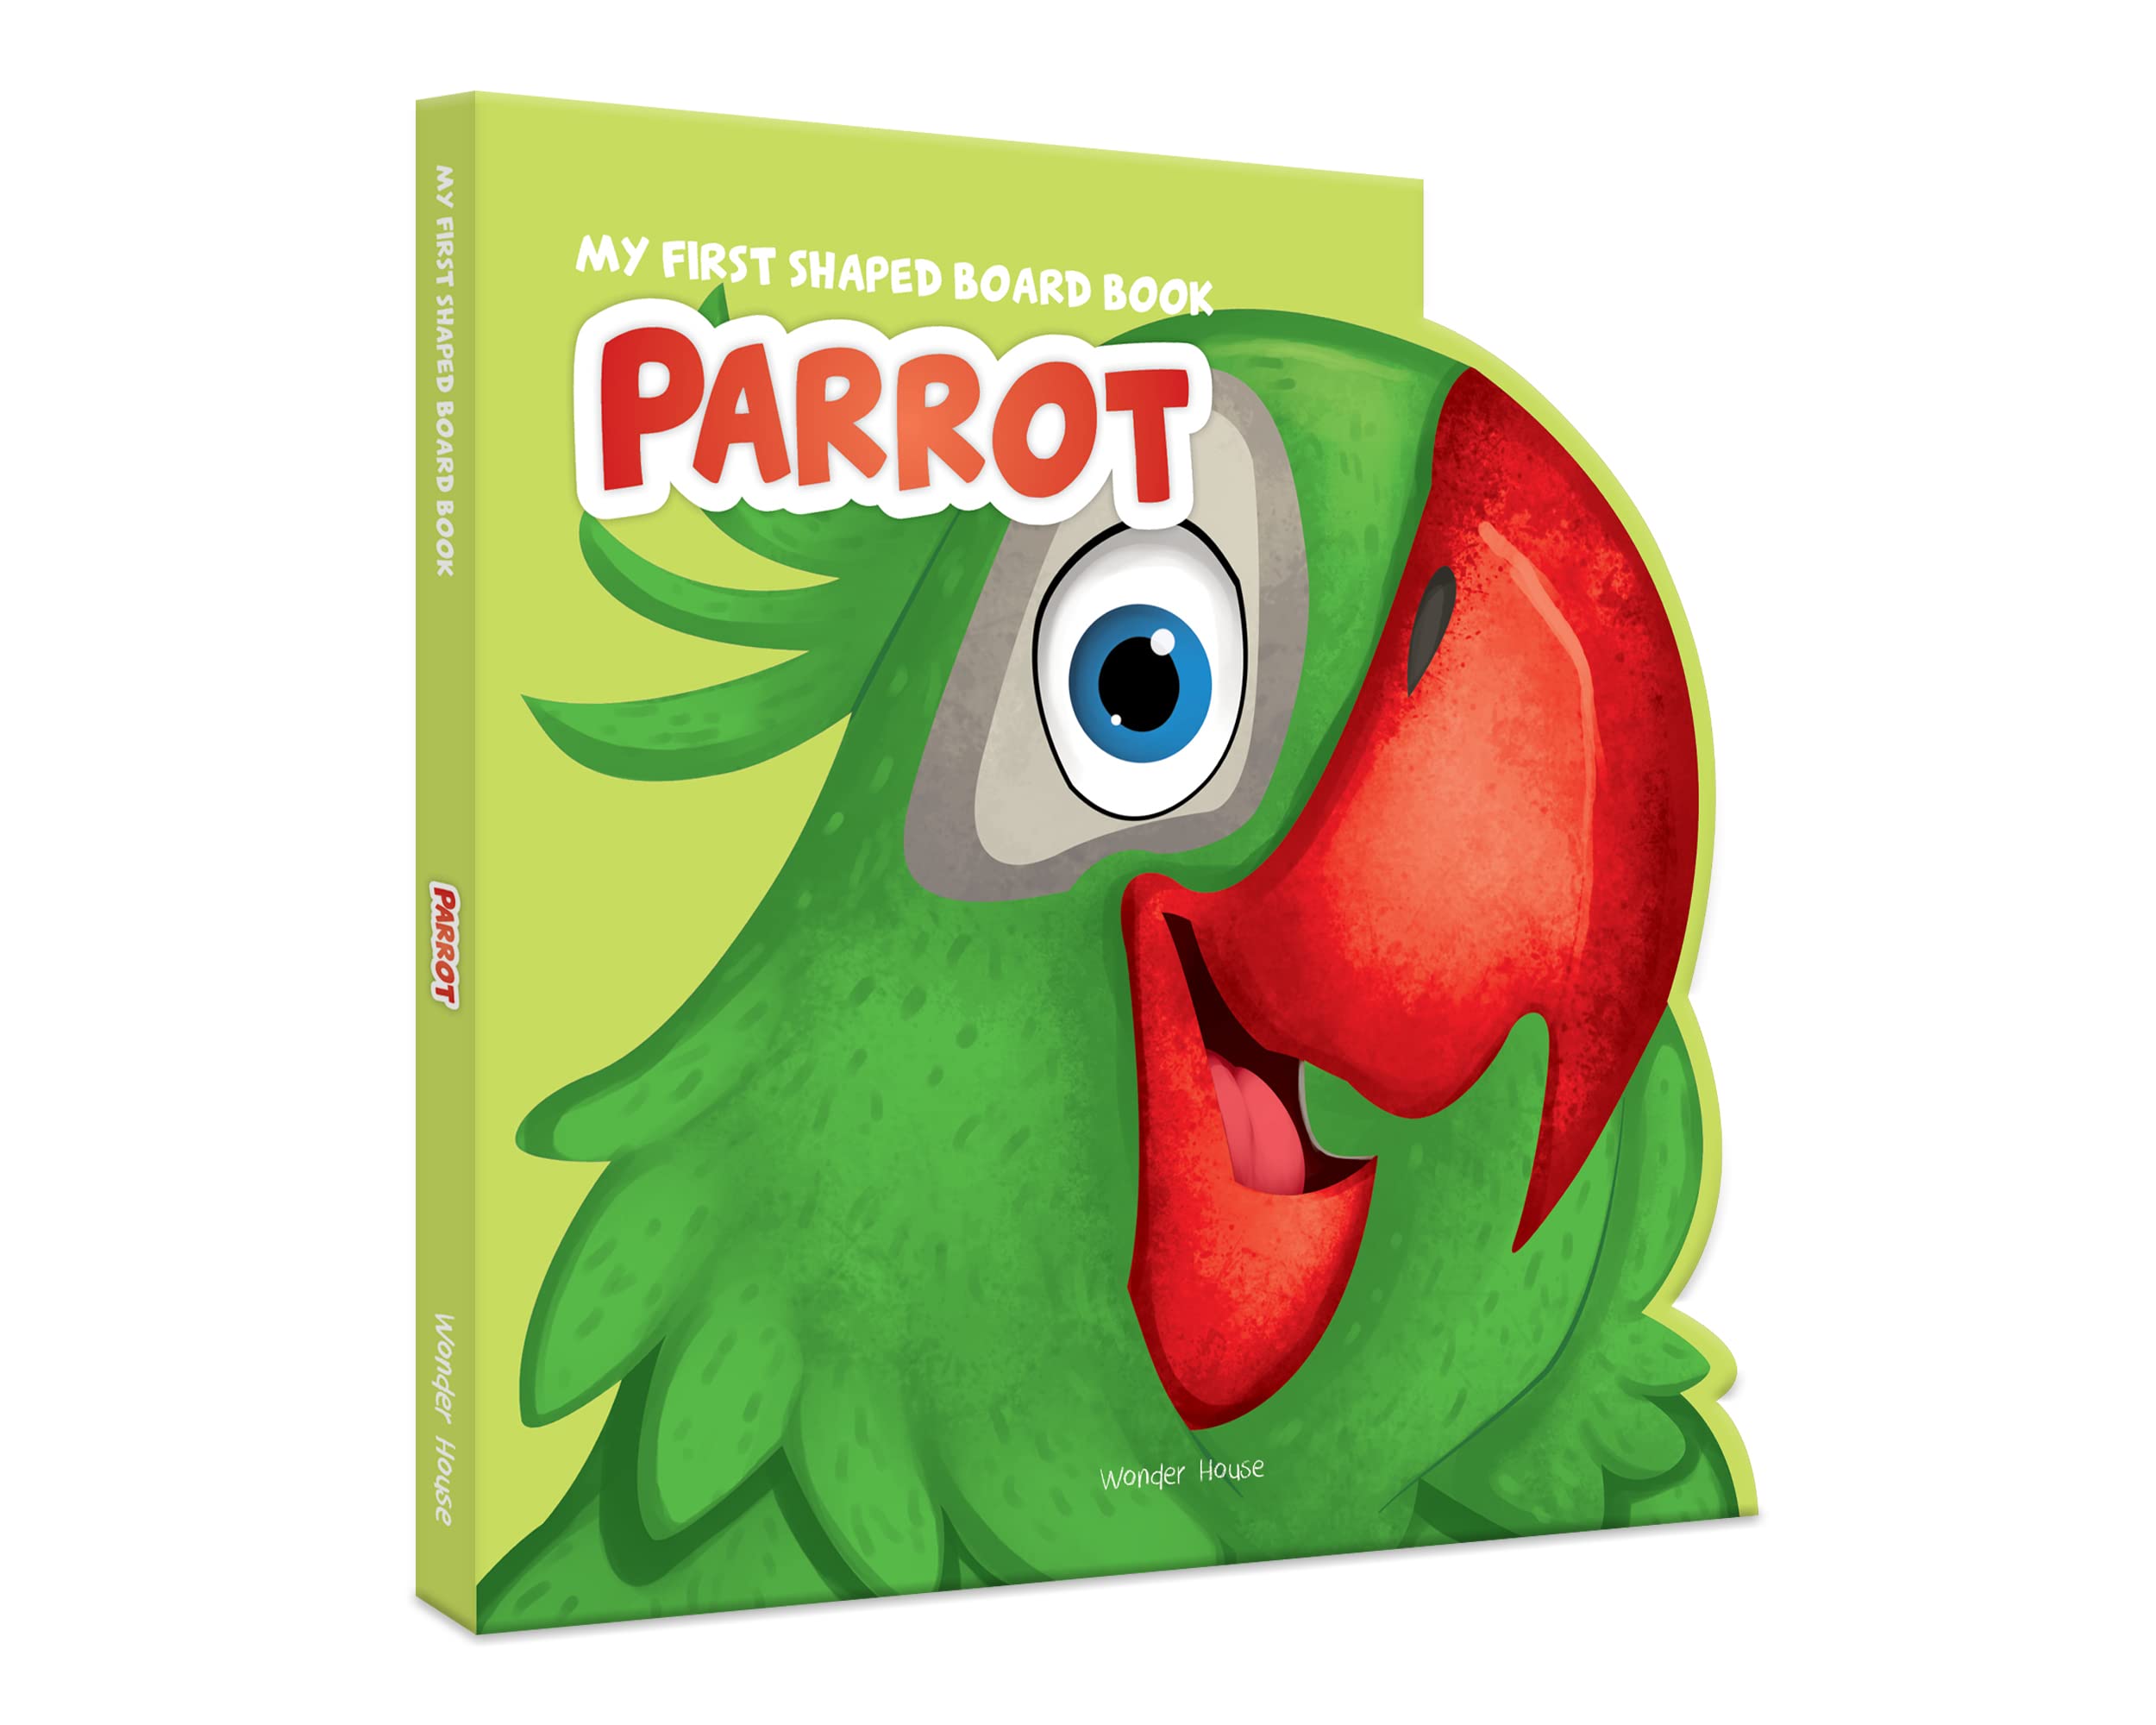 My First Shaped Board Book - Parrot